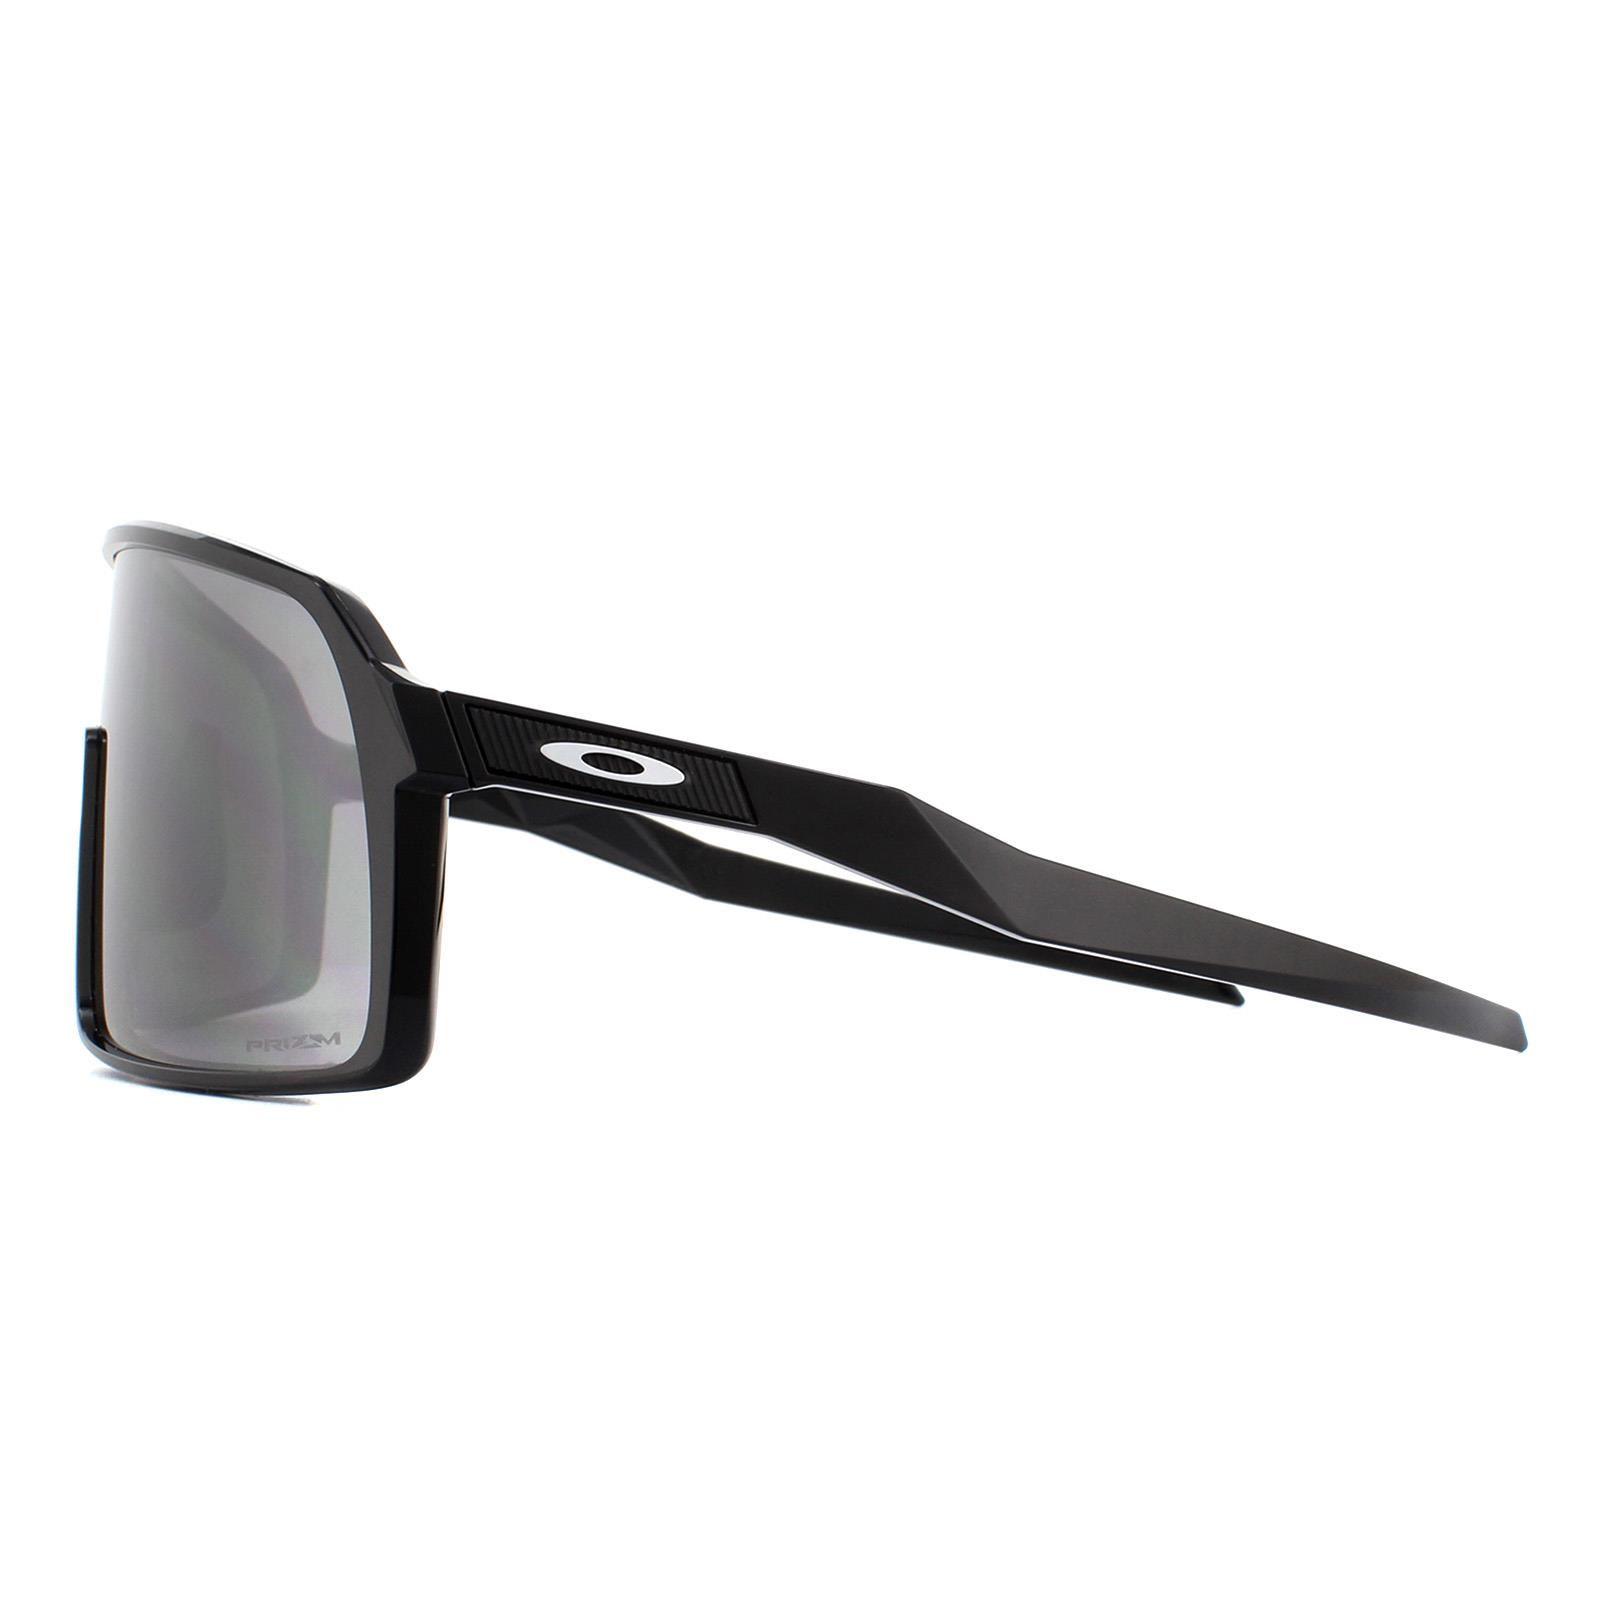 Oakley Sunglasses Sutro OO9406-01 Polished Black Prizm Black designed with performance in mind, Sutro is a versatile model for cyclists to wear on and off the bike. Made from lightweight O Matter for all-day comfort and durability. Unobtainium nose pads keep them in securely in place as the grip increases with perspiration.